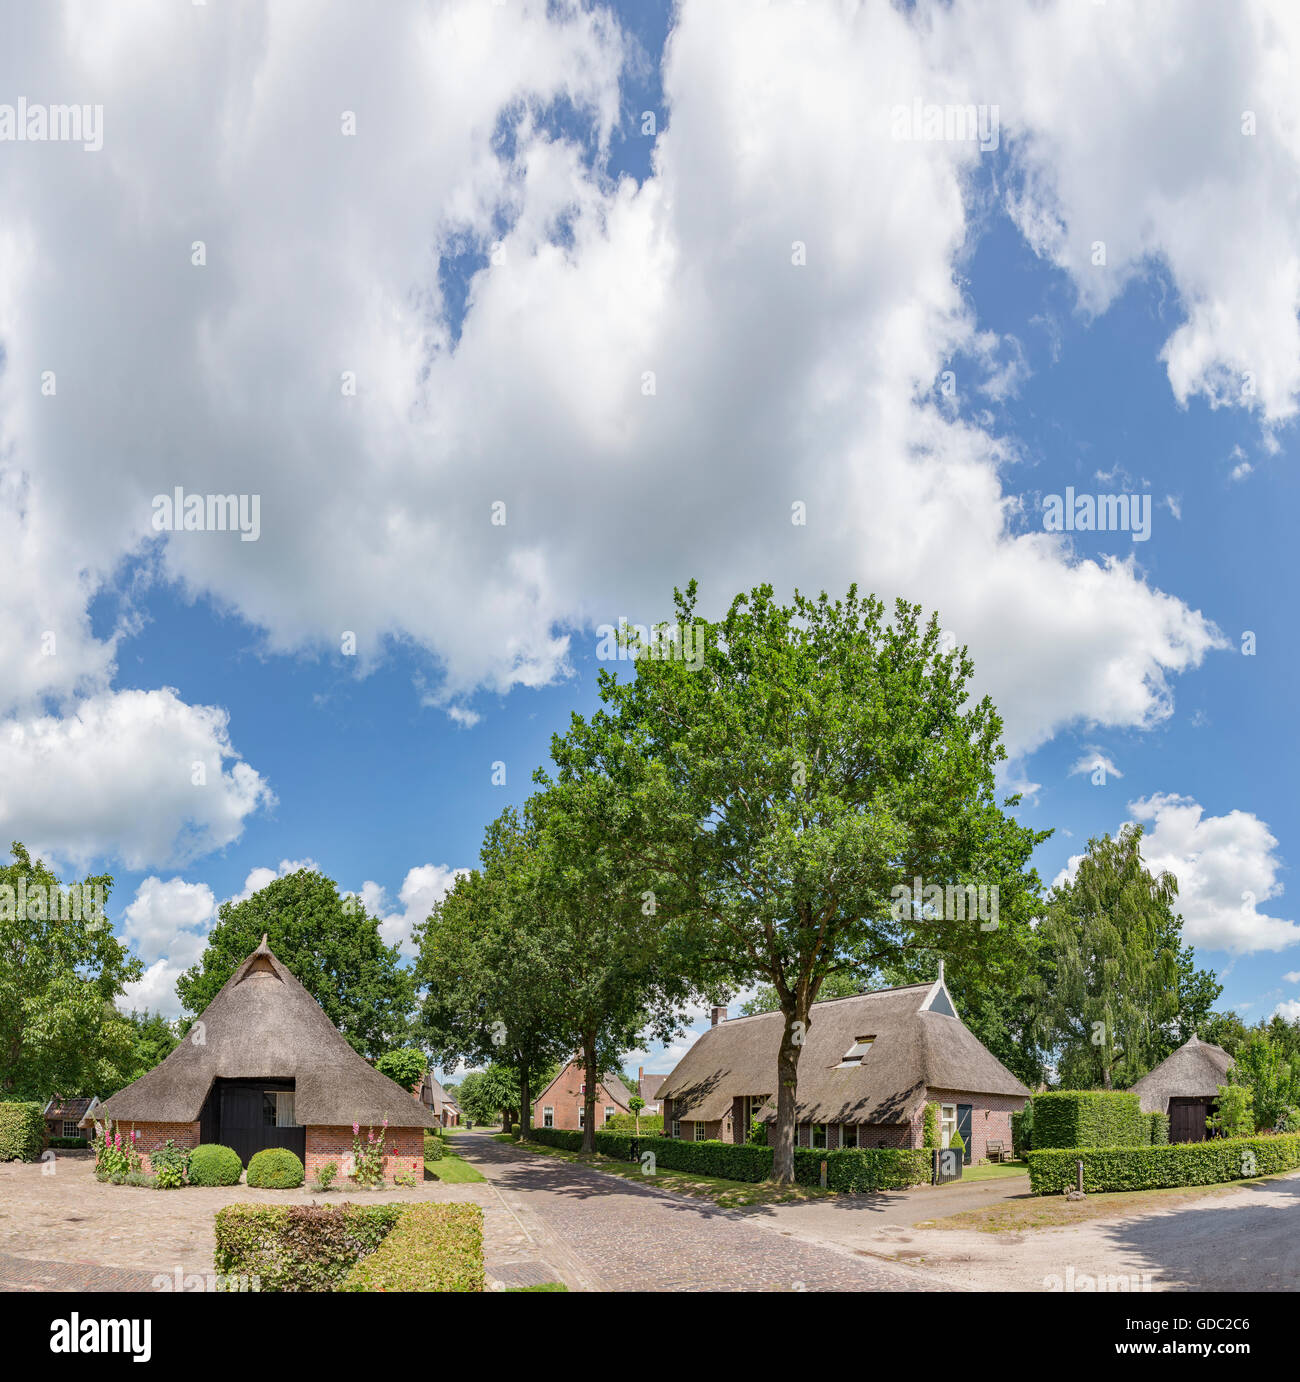 Norg,Drenthe,Farmhouses with a thatched roof Stock Photo